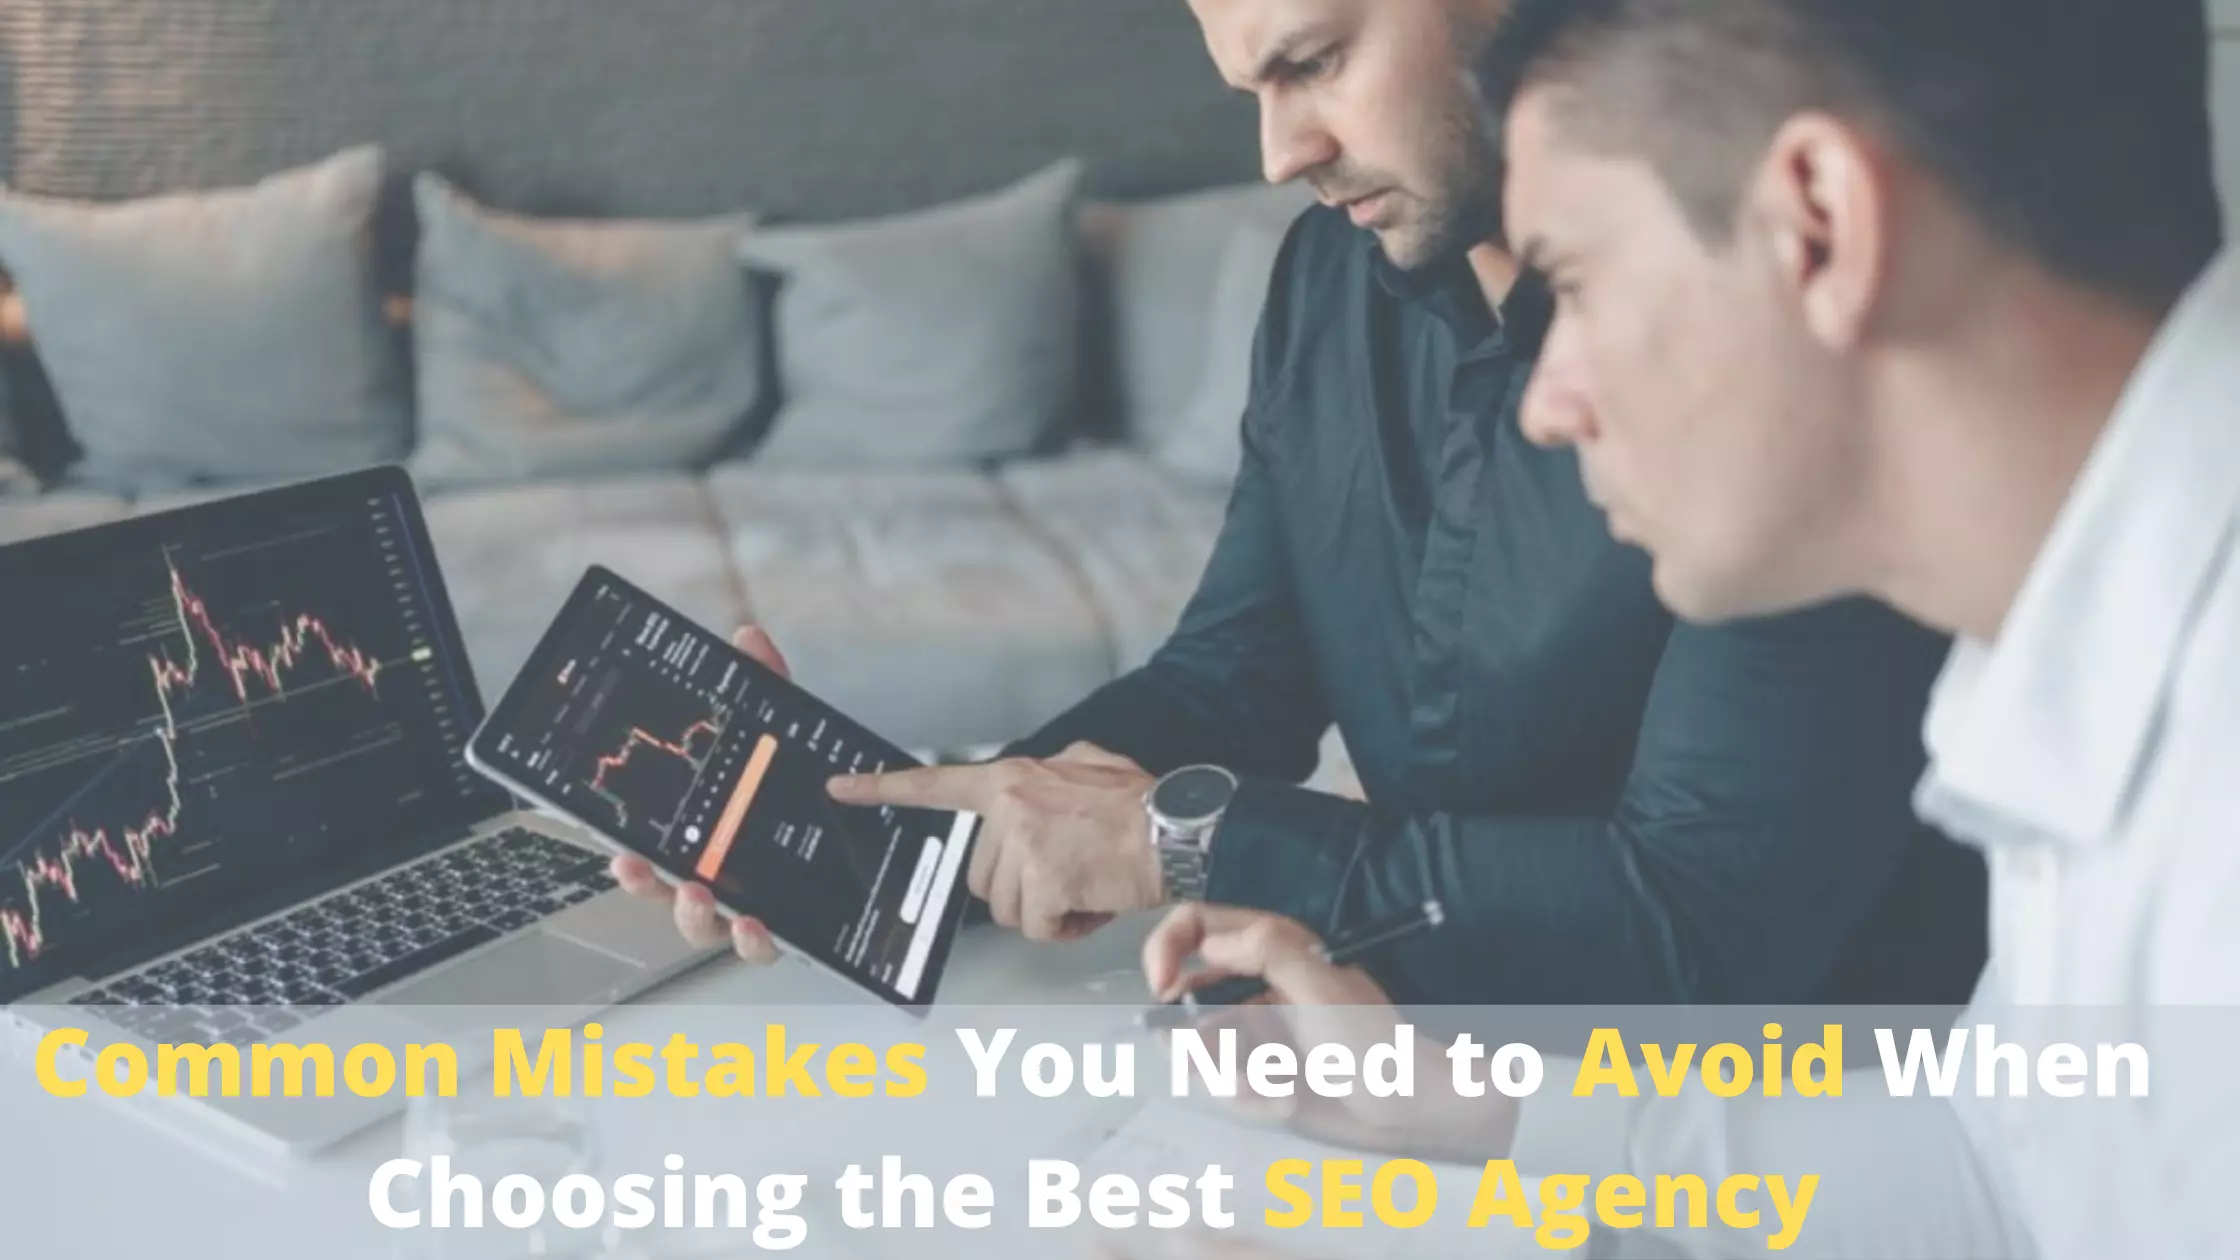 Common Mistakes You Need to Avoid When Choosing the Best SEO Agency